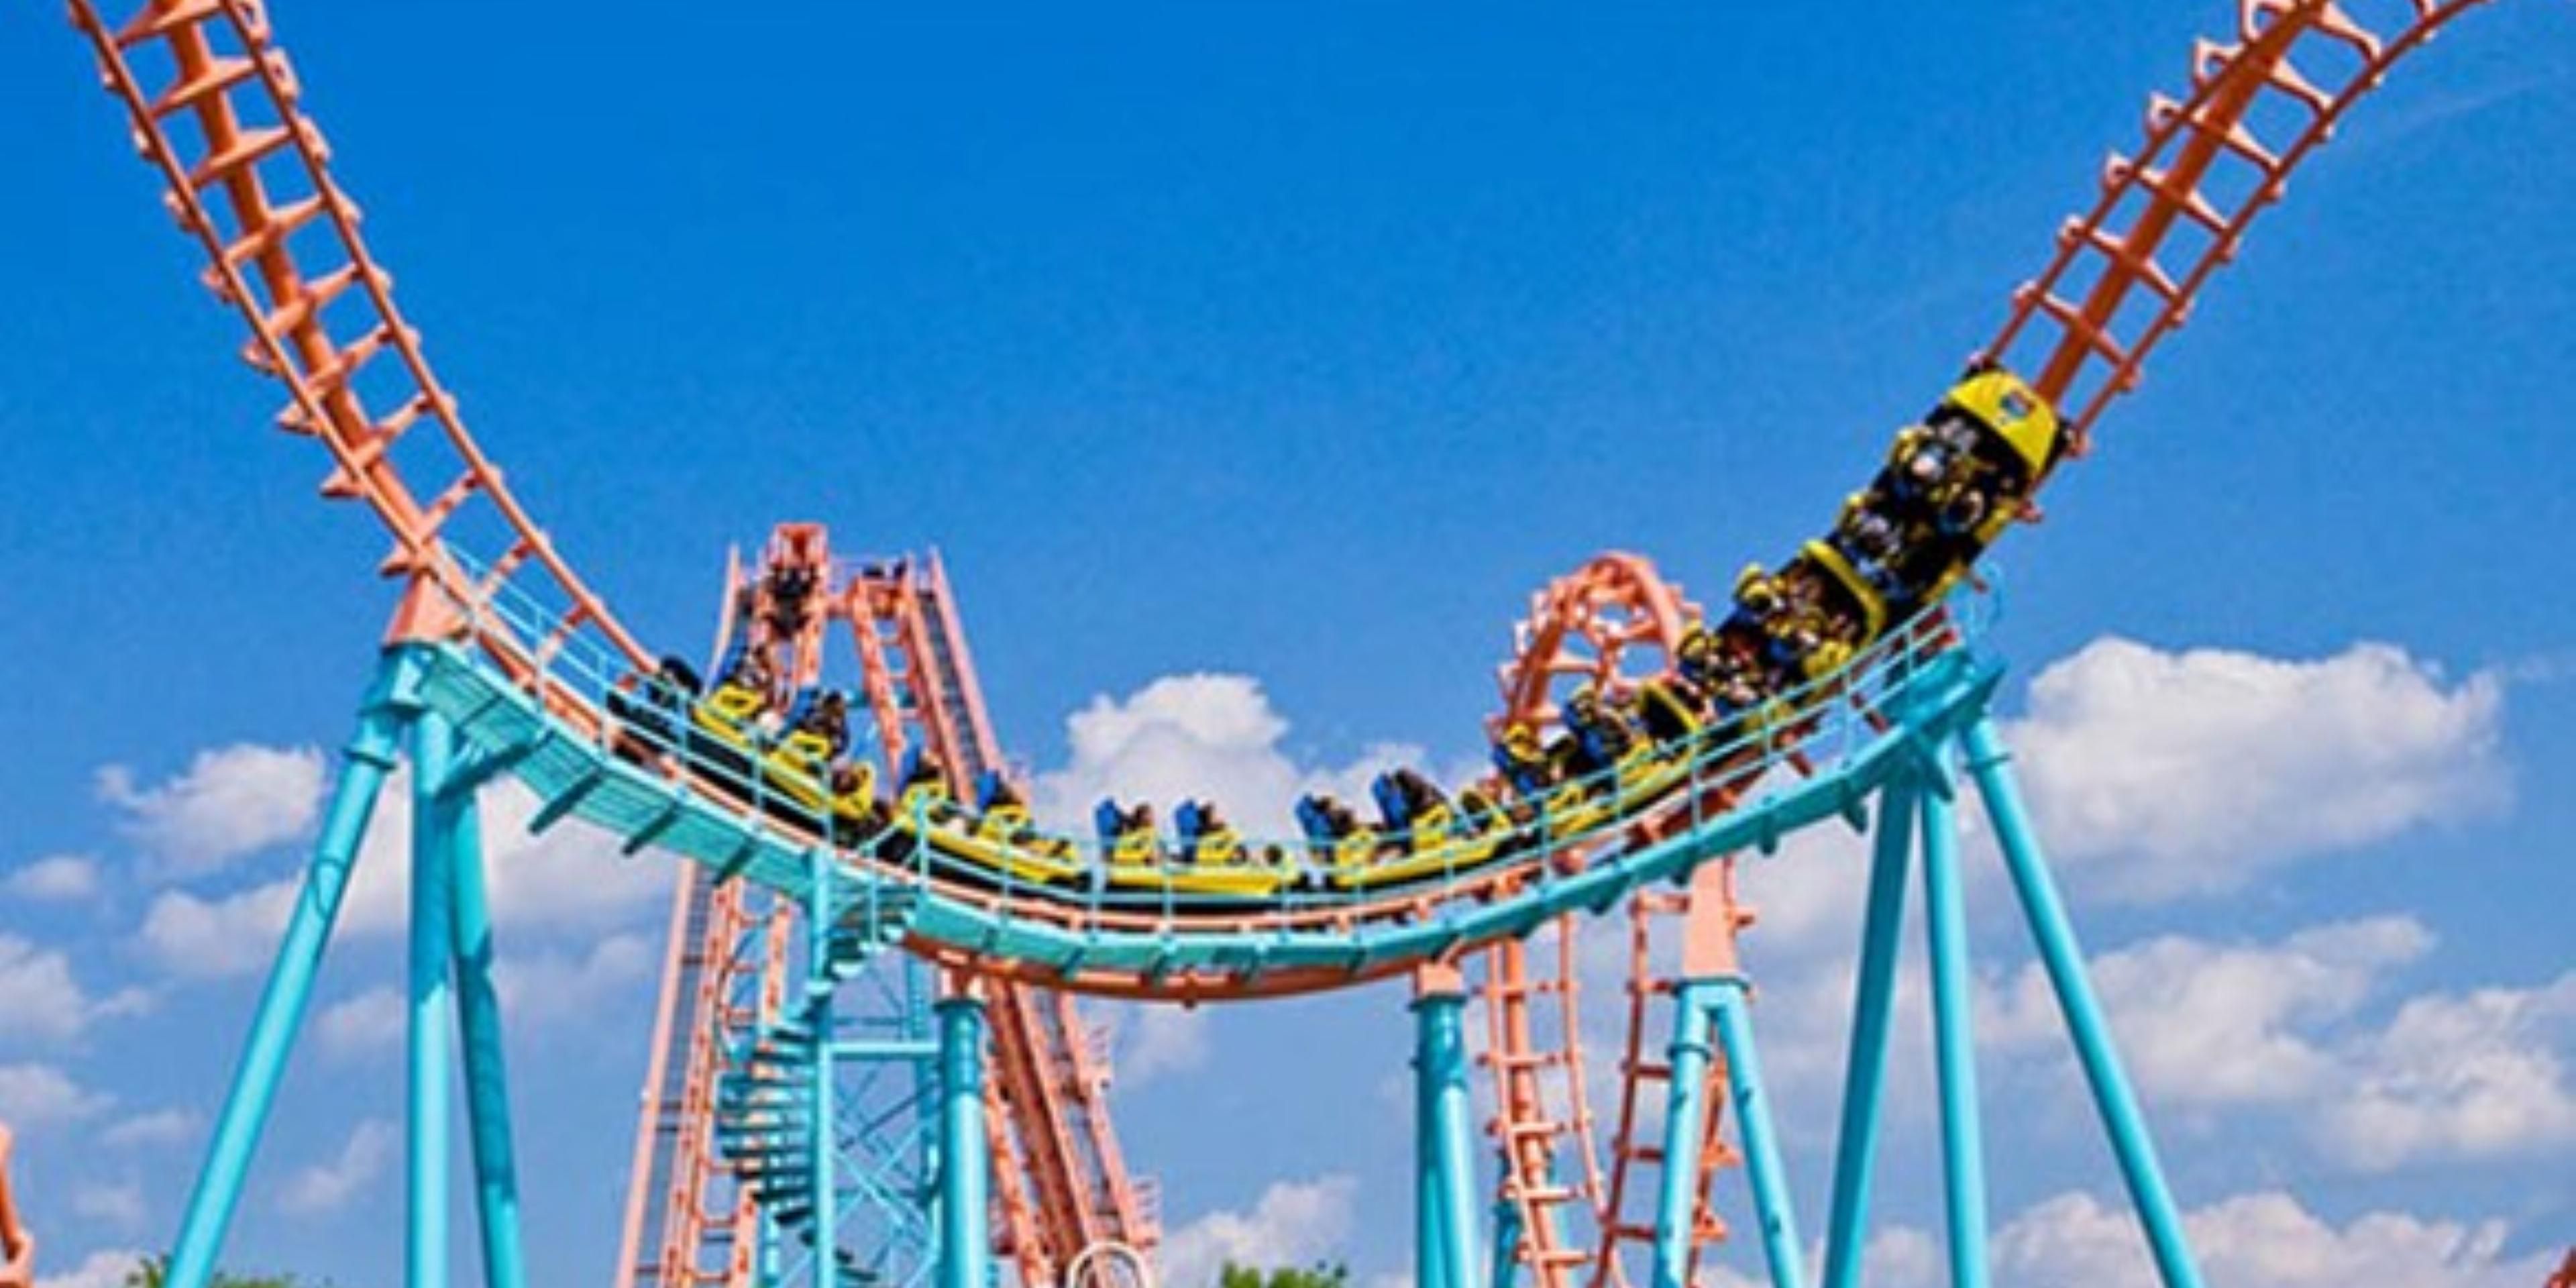 Carowinds is set to reopen on May 22 for the 2021 season. New health and safety procedures will be in place at the park, including mandatory face coverings and health screenings.